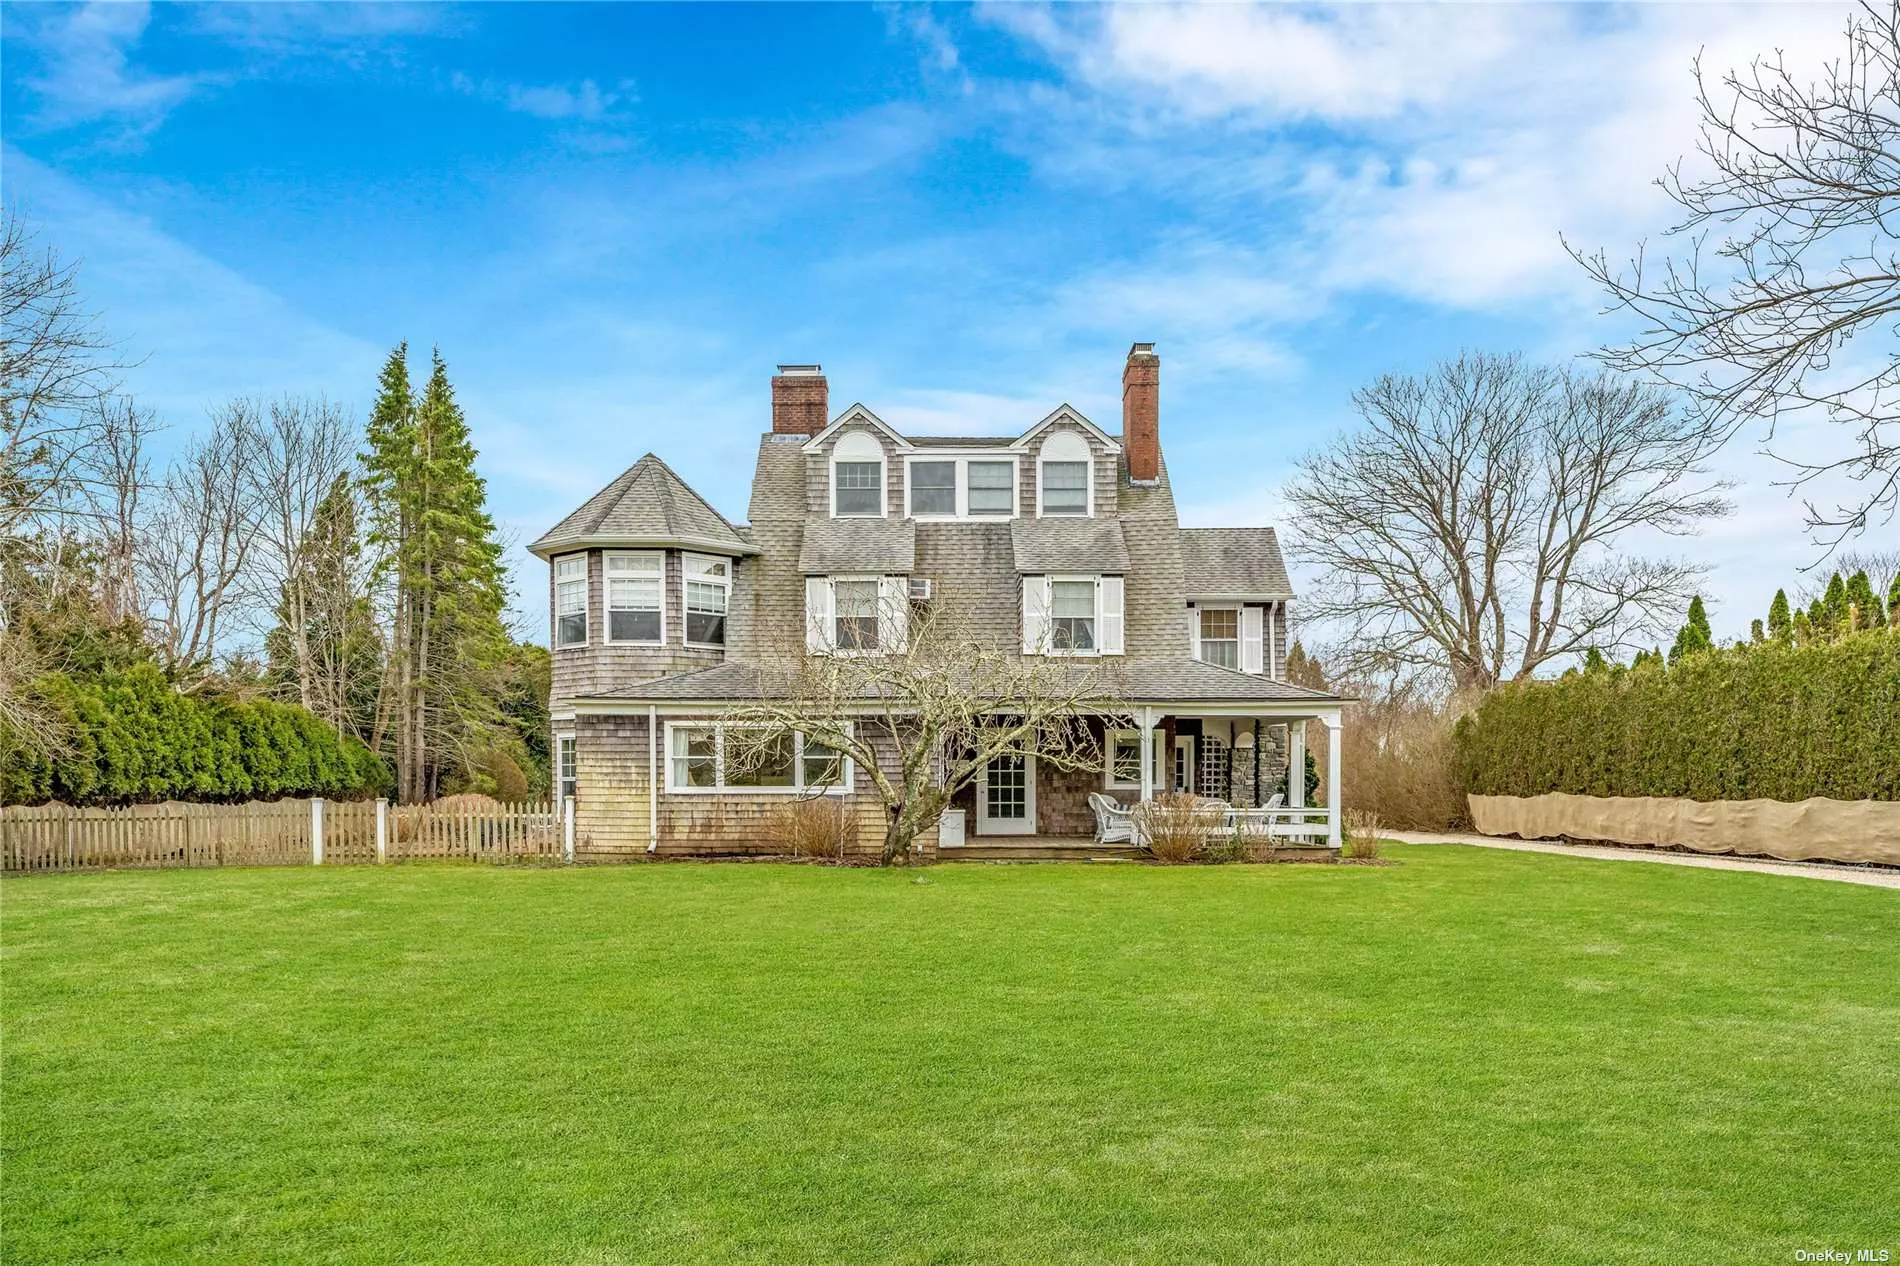 tart your summer in a classic Quogue house with plenty of room for guests. This house has ten bedrooms with a bedroom on the first floor and a heated pool and large front yard; walk to the village and Bike to the beach in minutes.